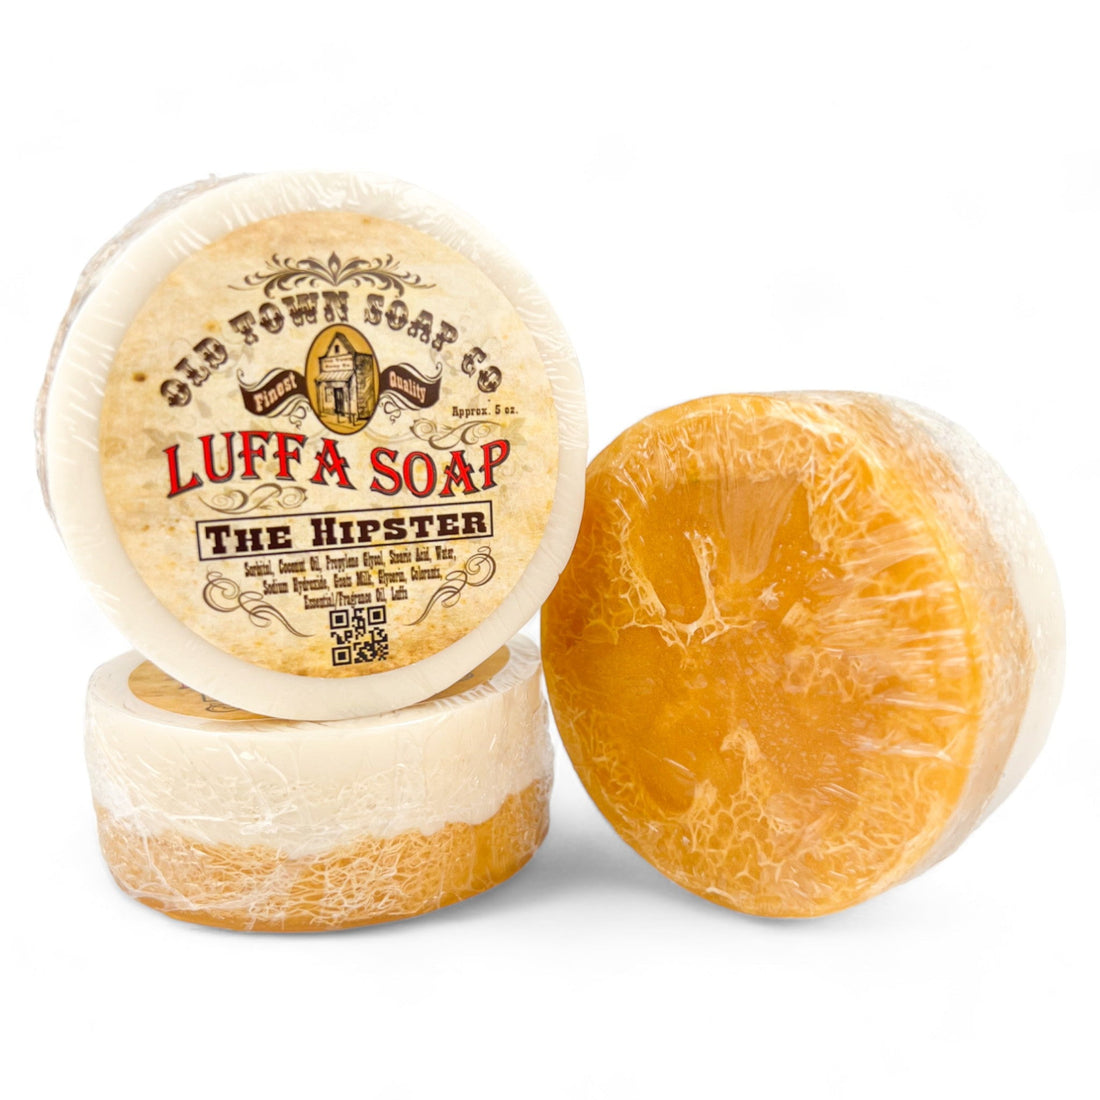 The Hipster -Luffa Soap - Old Town Soap Co.